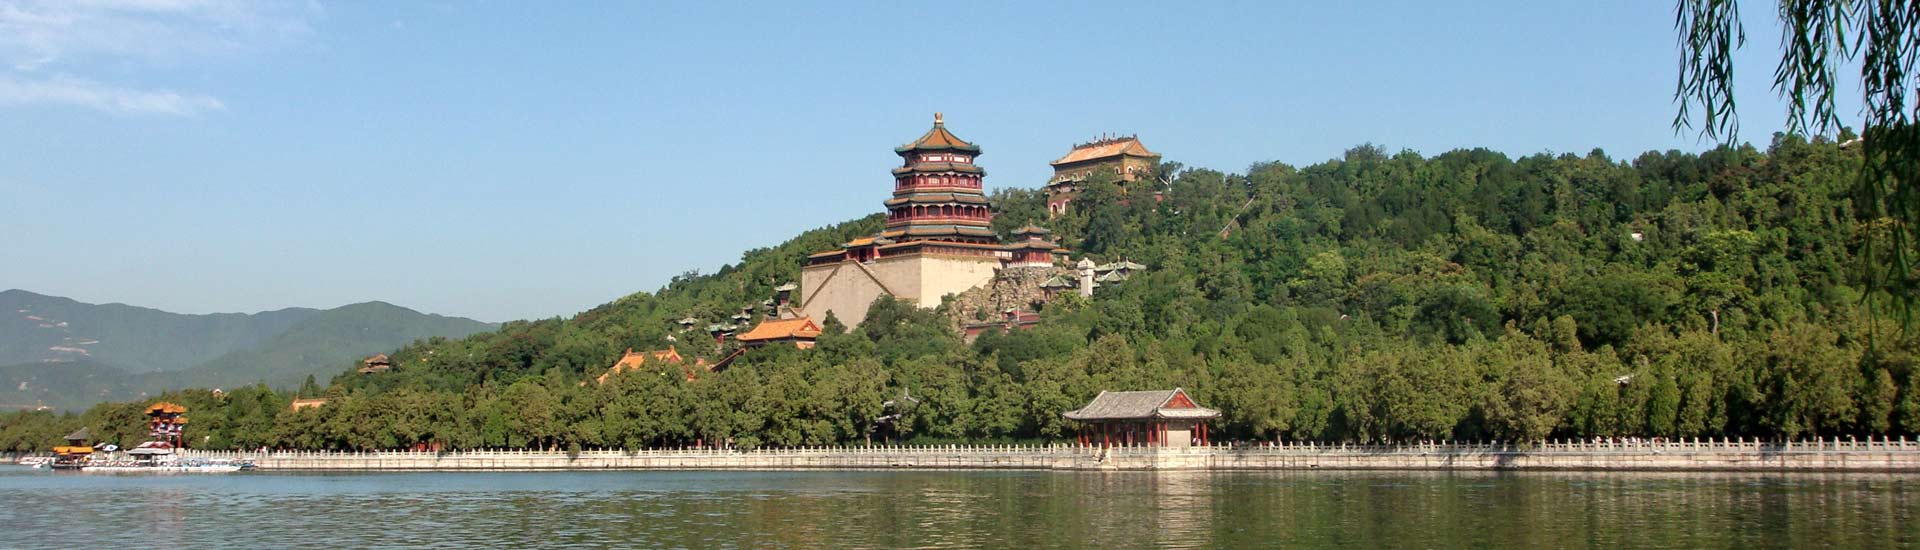 1 Day tour: Forbidden city, Temple of Heaven, Summer Palace